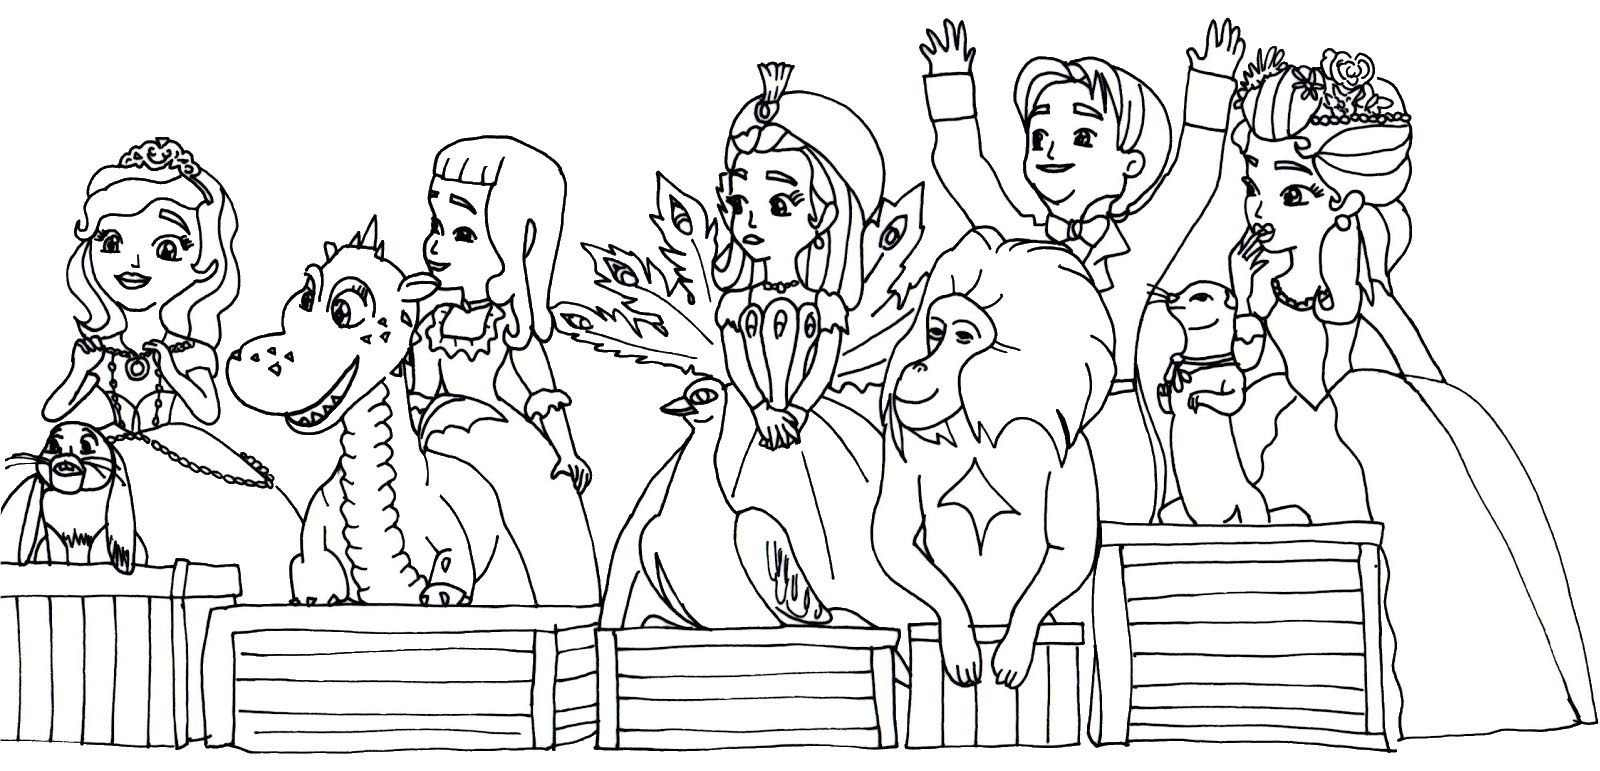 Free Sofia The First Coloring Pages Coloring Pictures printable